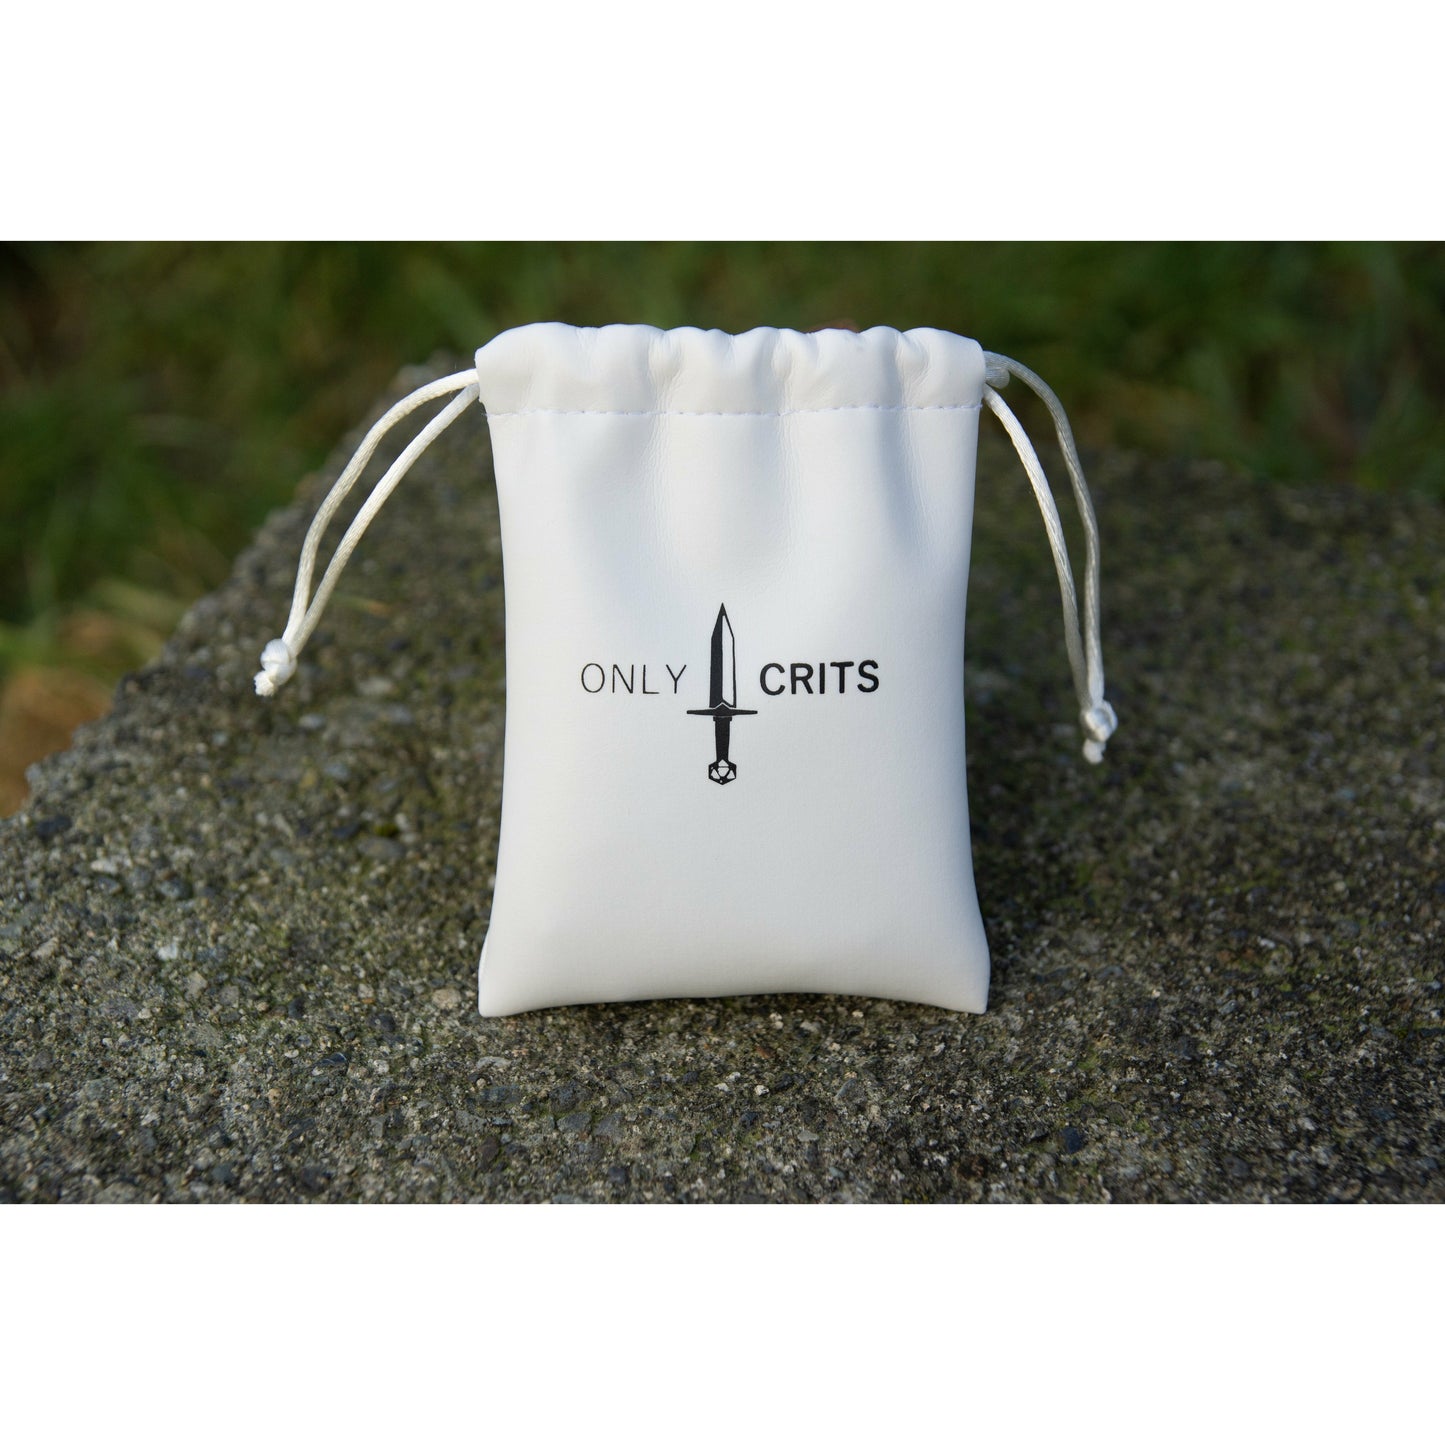 Complementary white only crits dice carrying bag